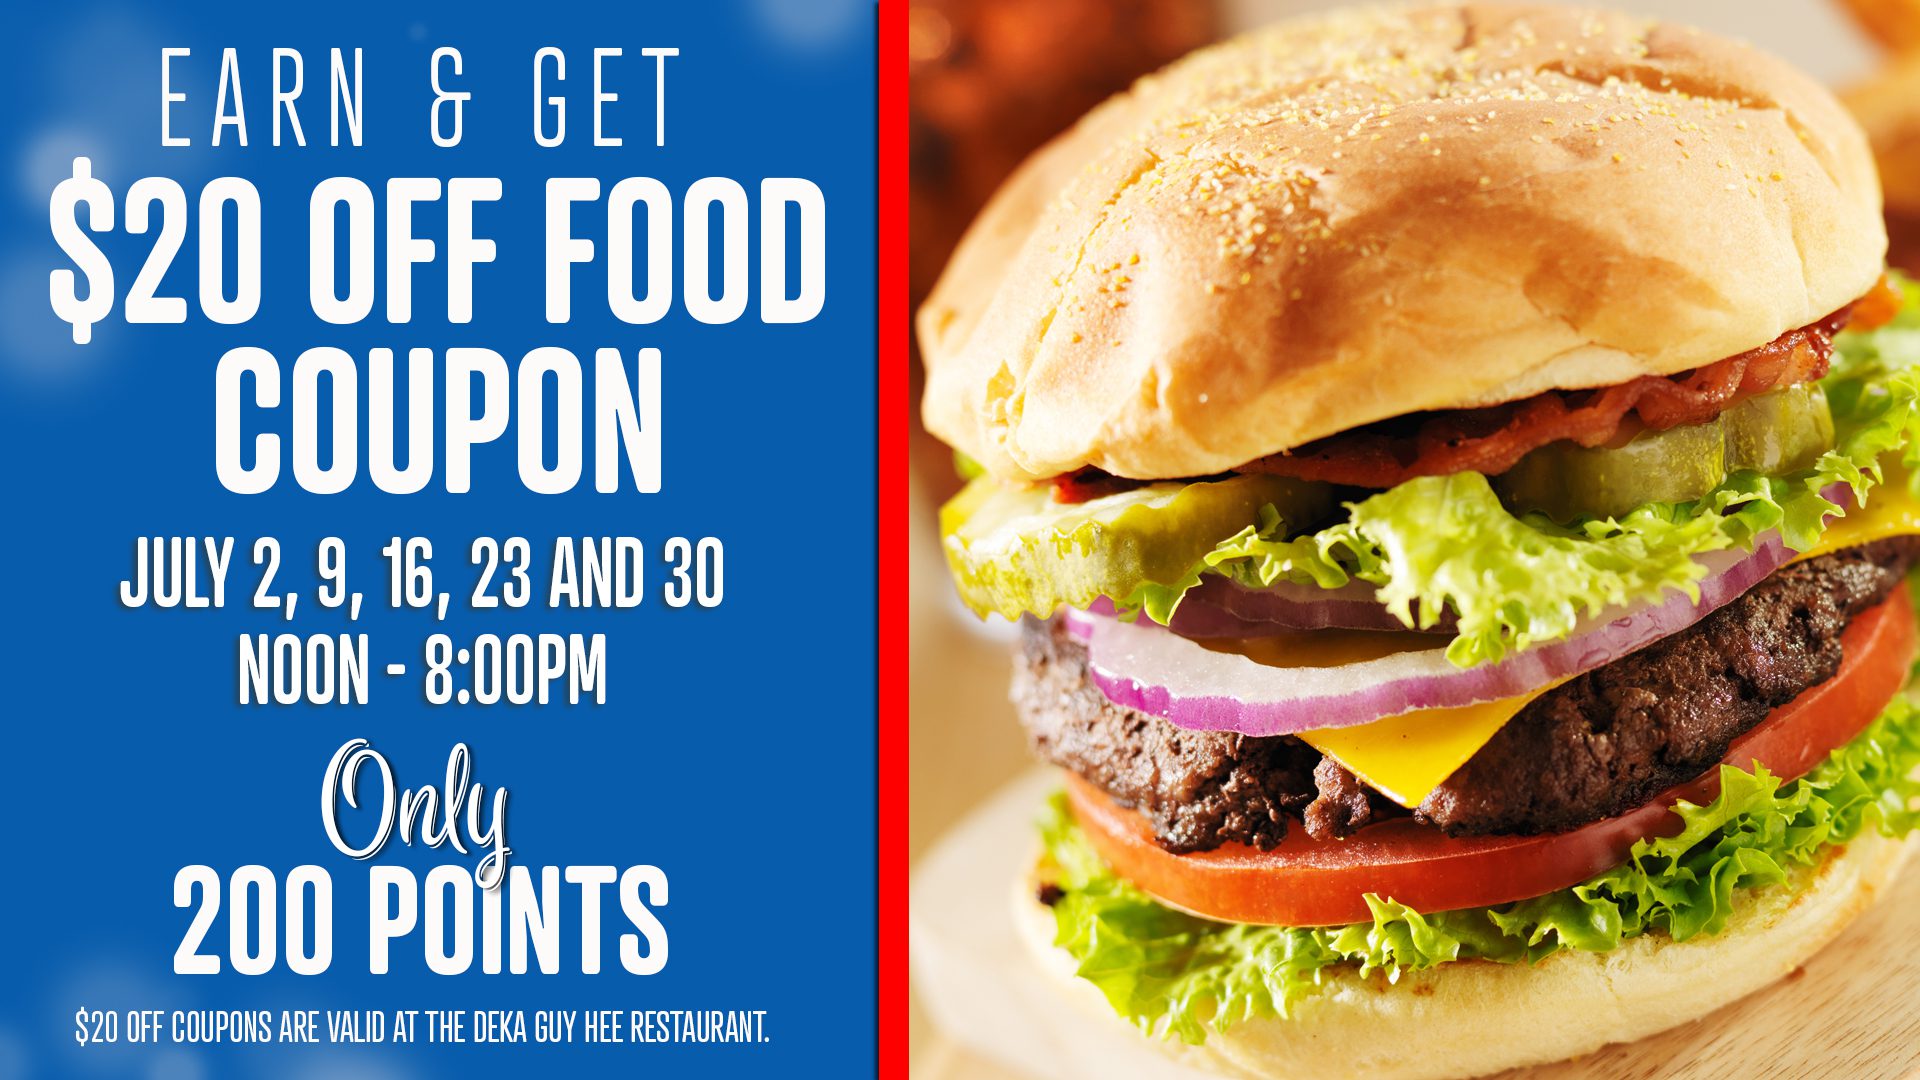 Promotional flyer offering a $20 off food coupon for select dates with participation, featuring an appetizing burger image.